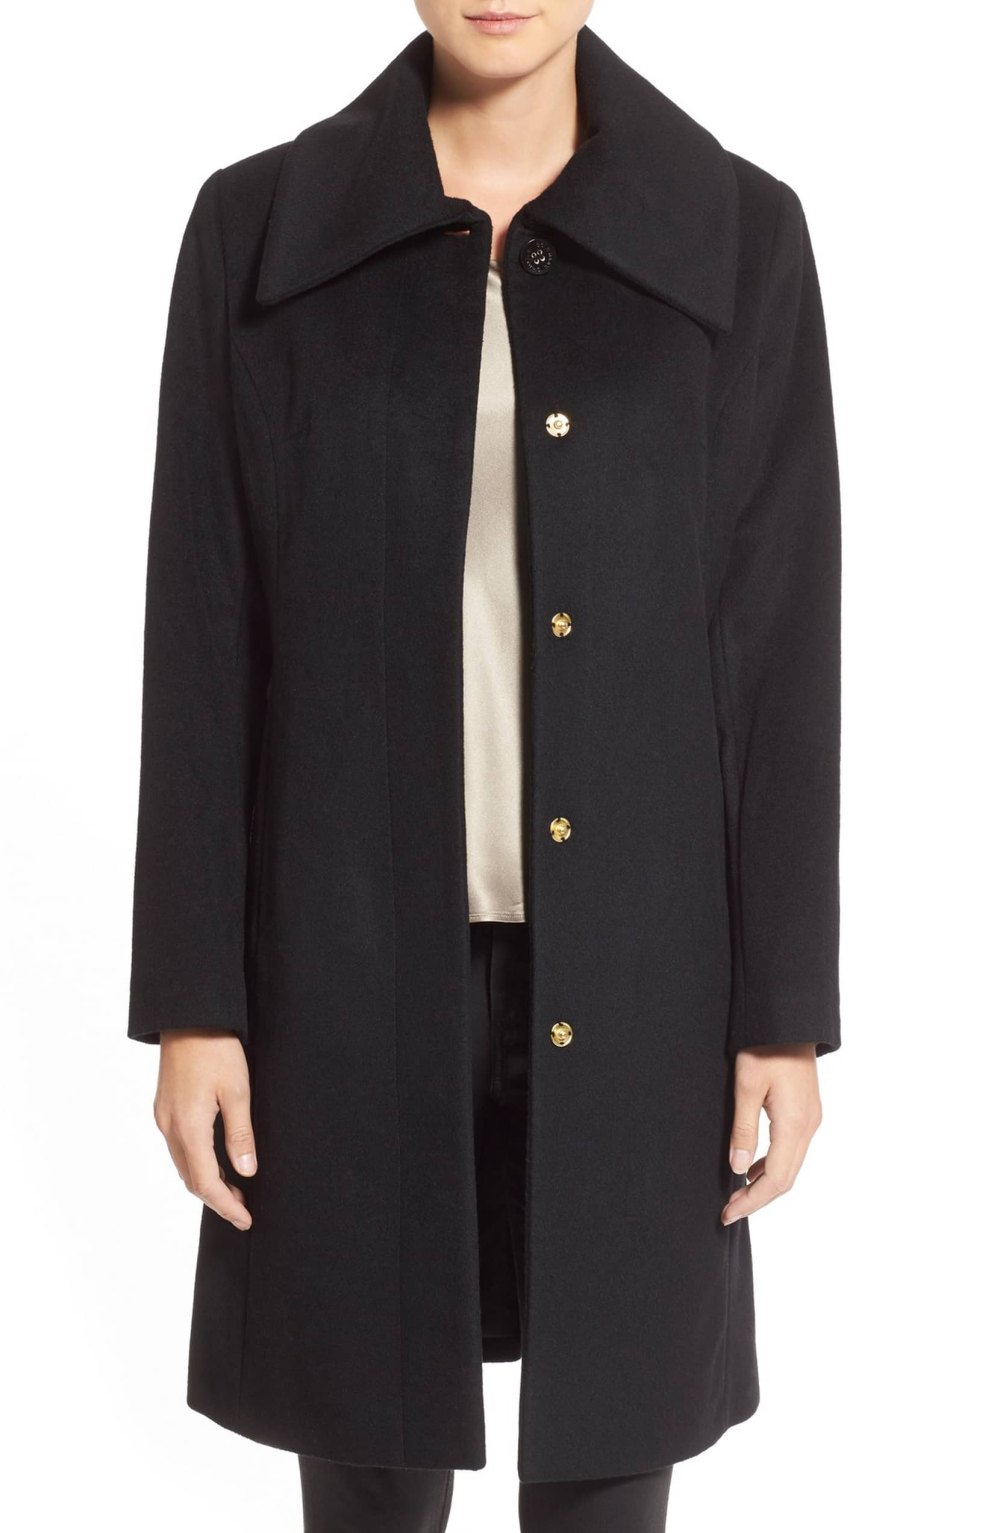 Cole Haan Signature Single Breasted Wool Blend Coat